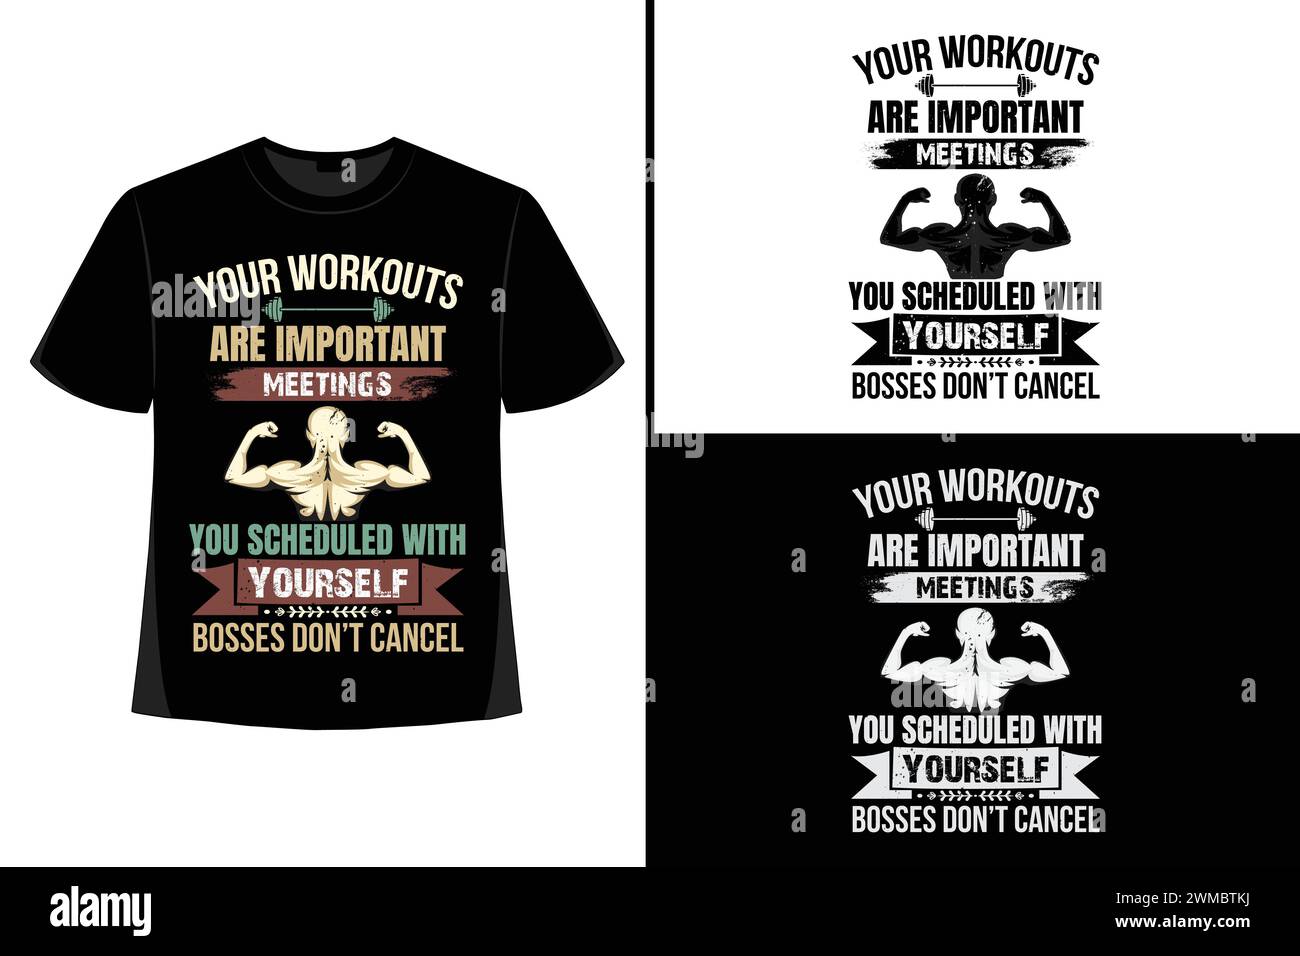 https://c8.alamy.com/comp/2WMBTKJ/gym-motivational-quote-with-grunge-effect-and-barbell-workout-inspirational-poster-vector-design-for-gym-textile-posters-tshirt-cover-banner-cards-2WMBTKJ.jpg